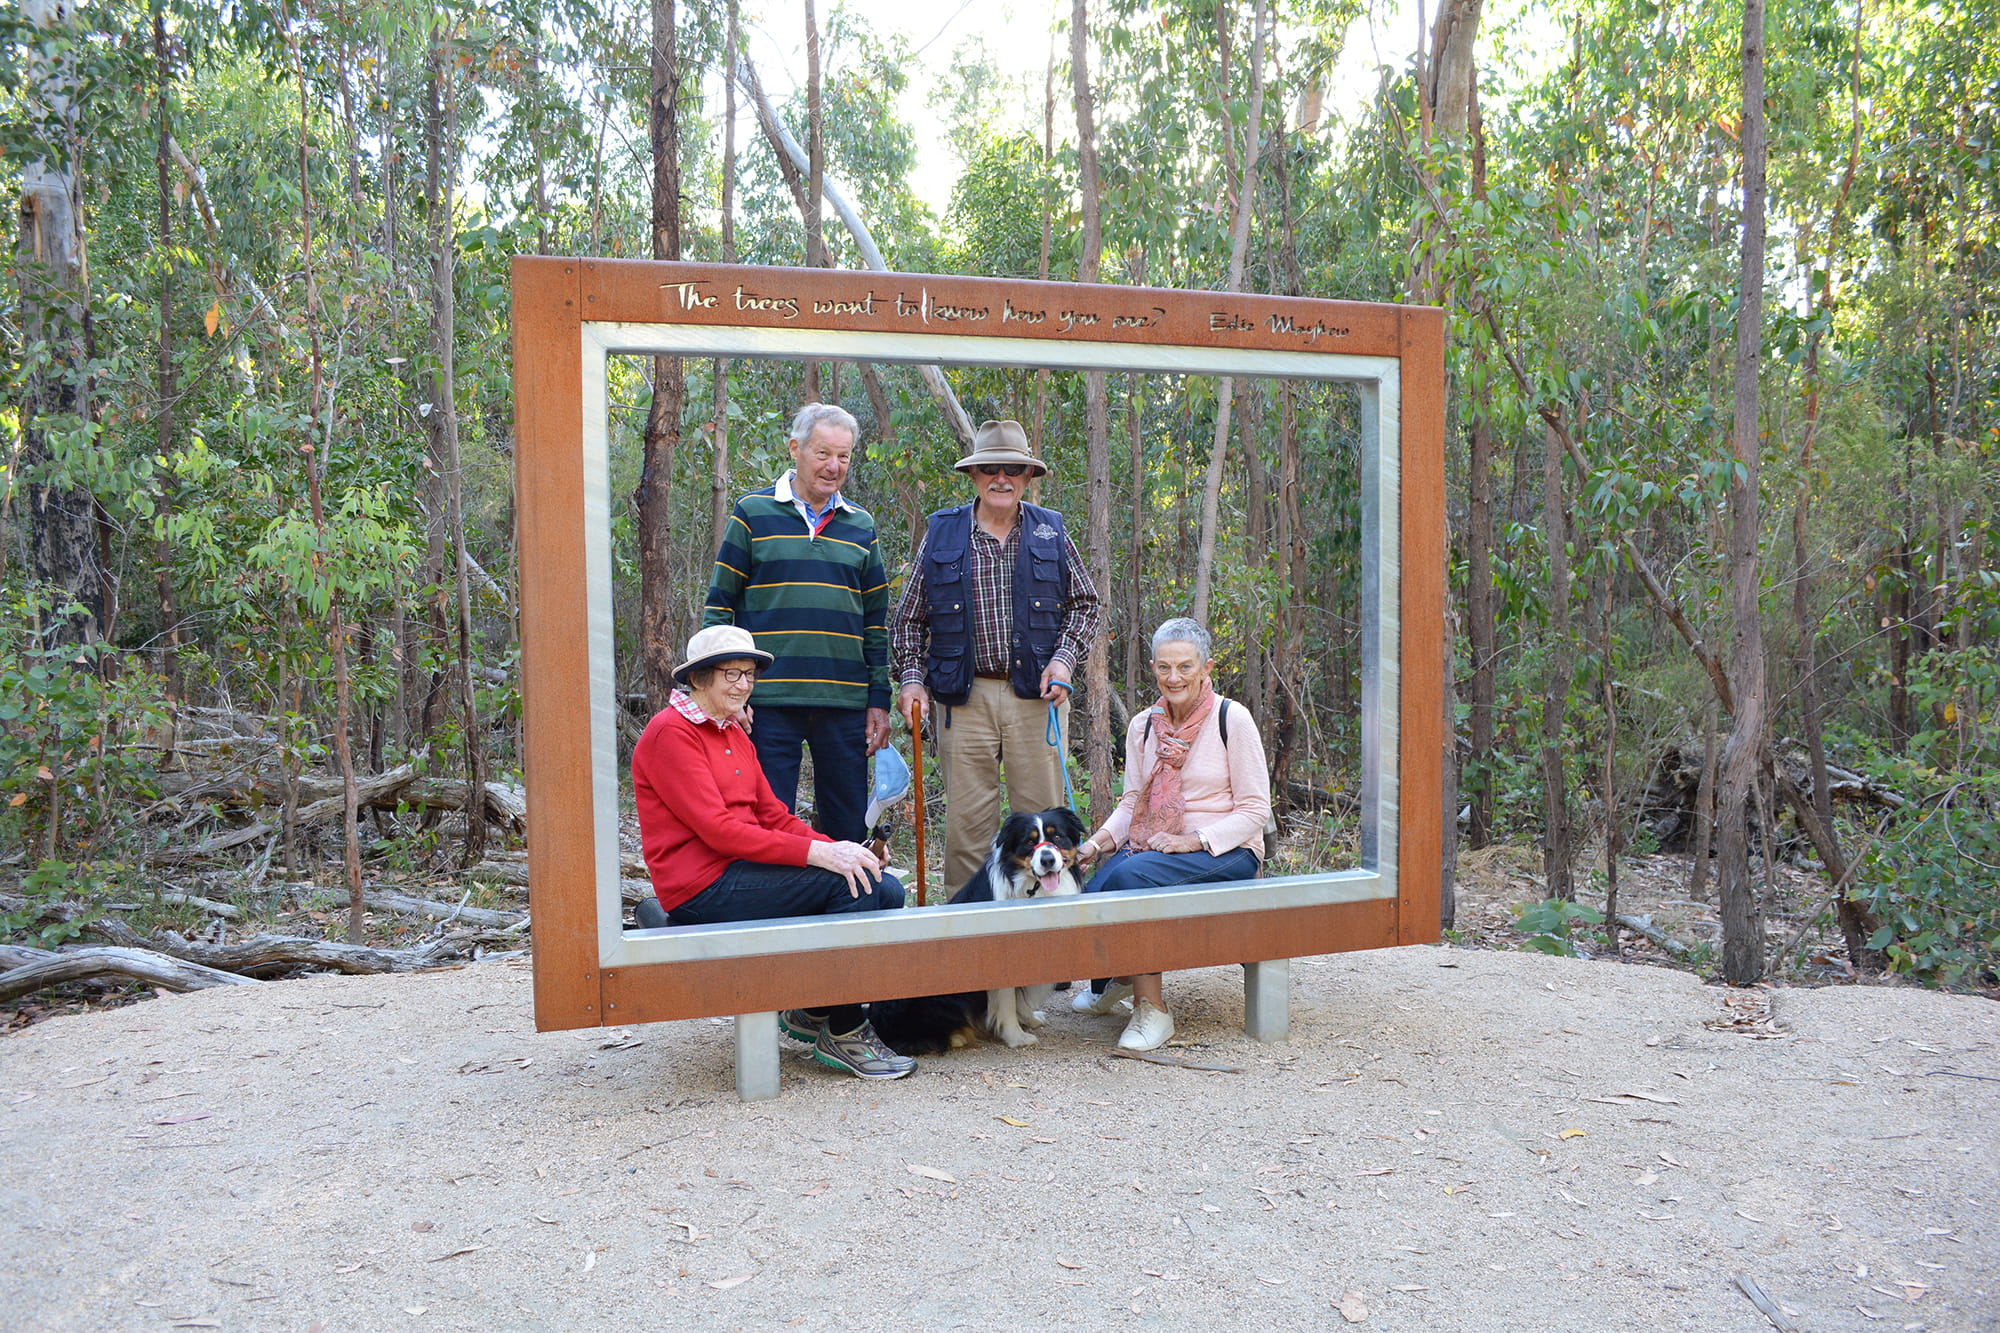 Four people and a dog standing inside a large metal photo frame in the bush